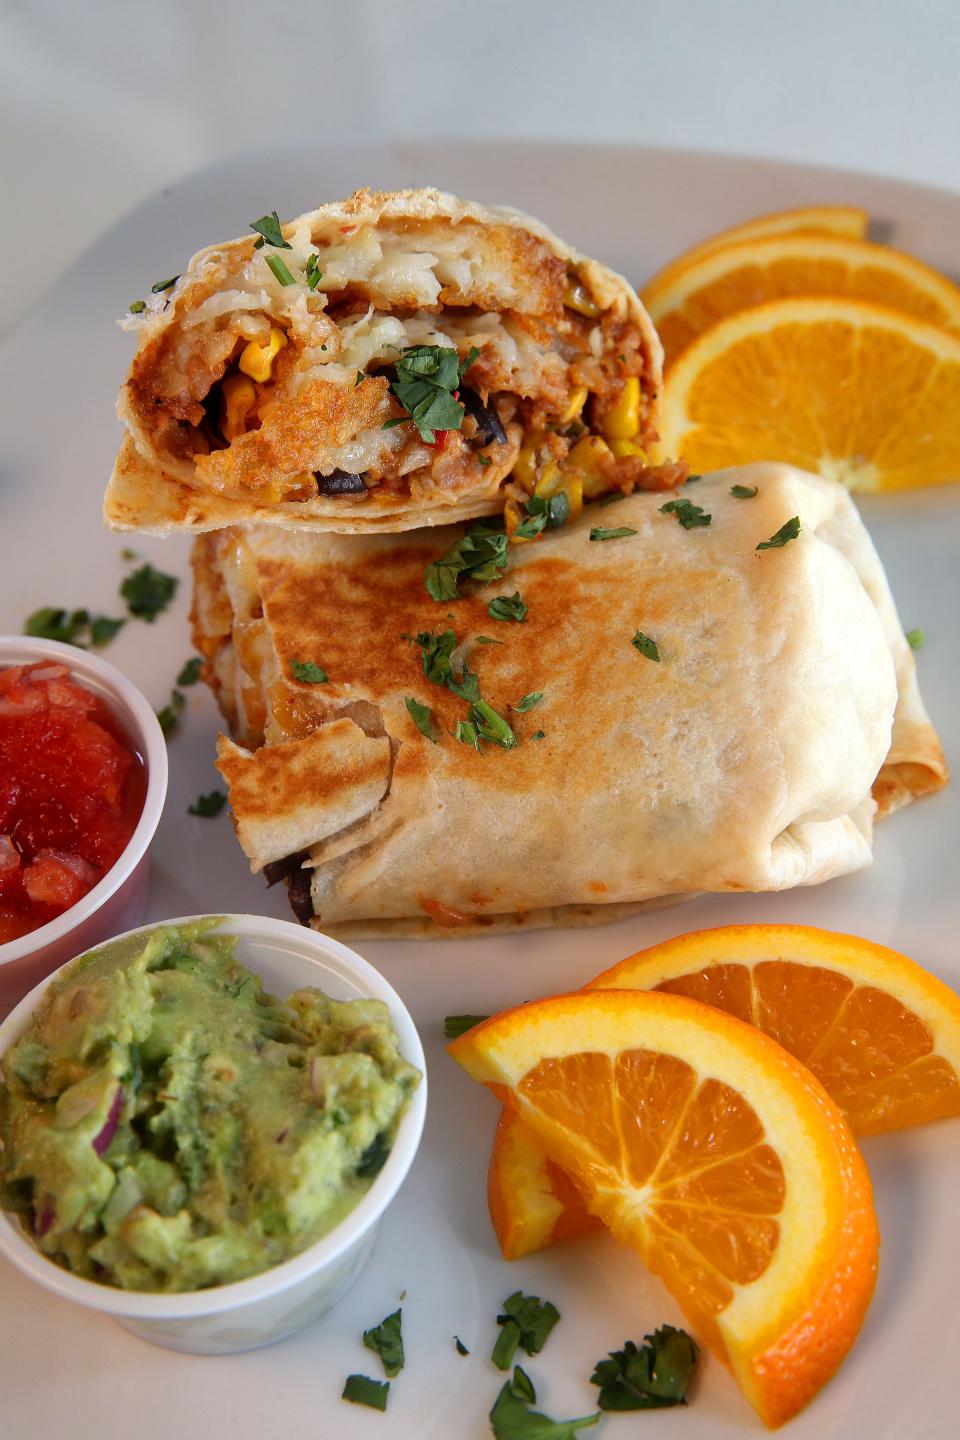 A breakfast burrito with house-made vegan chorizo is on the brunch menu at plant-based Lafayette Place on the east side.